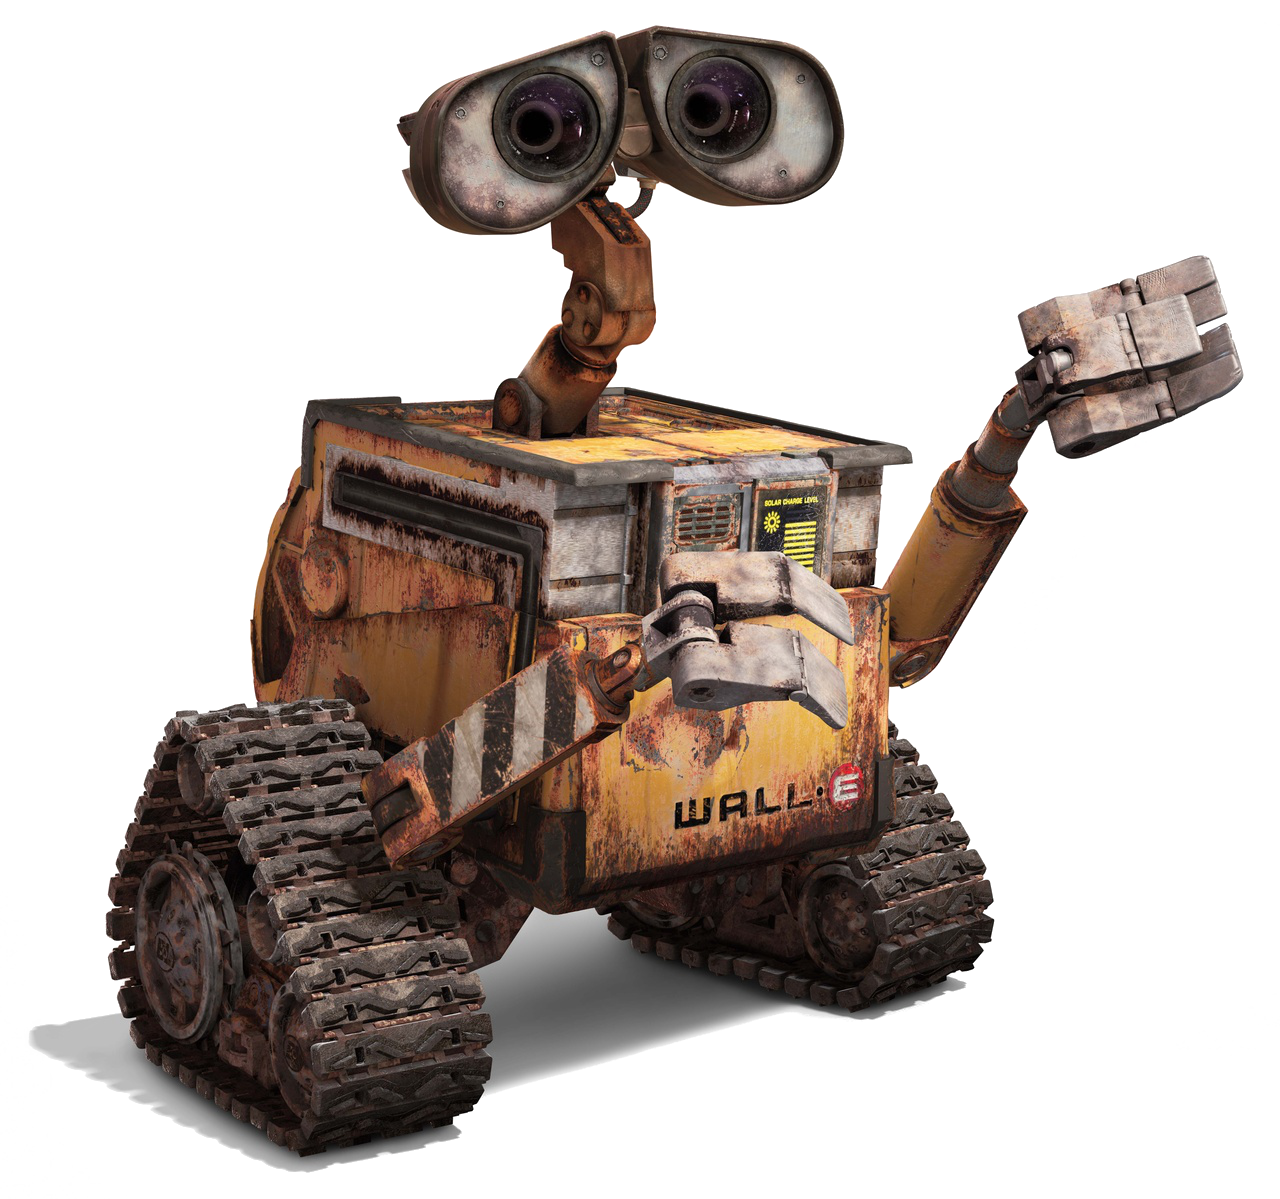 https://vignette.wikia.nocookie.net/disney/images/2/2b/Wall-E.png/revision/latest?cb=20151002192237